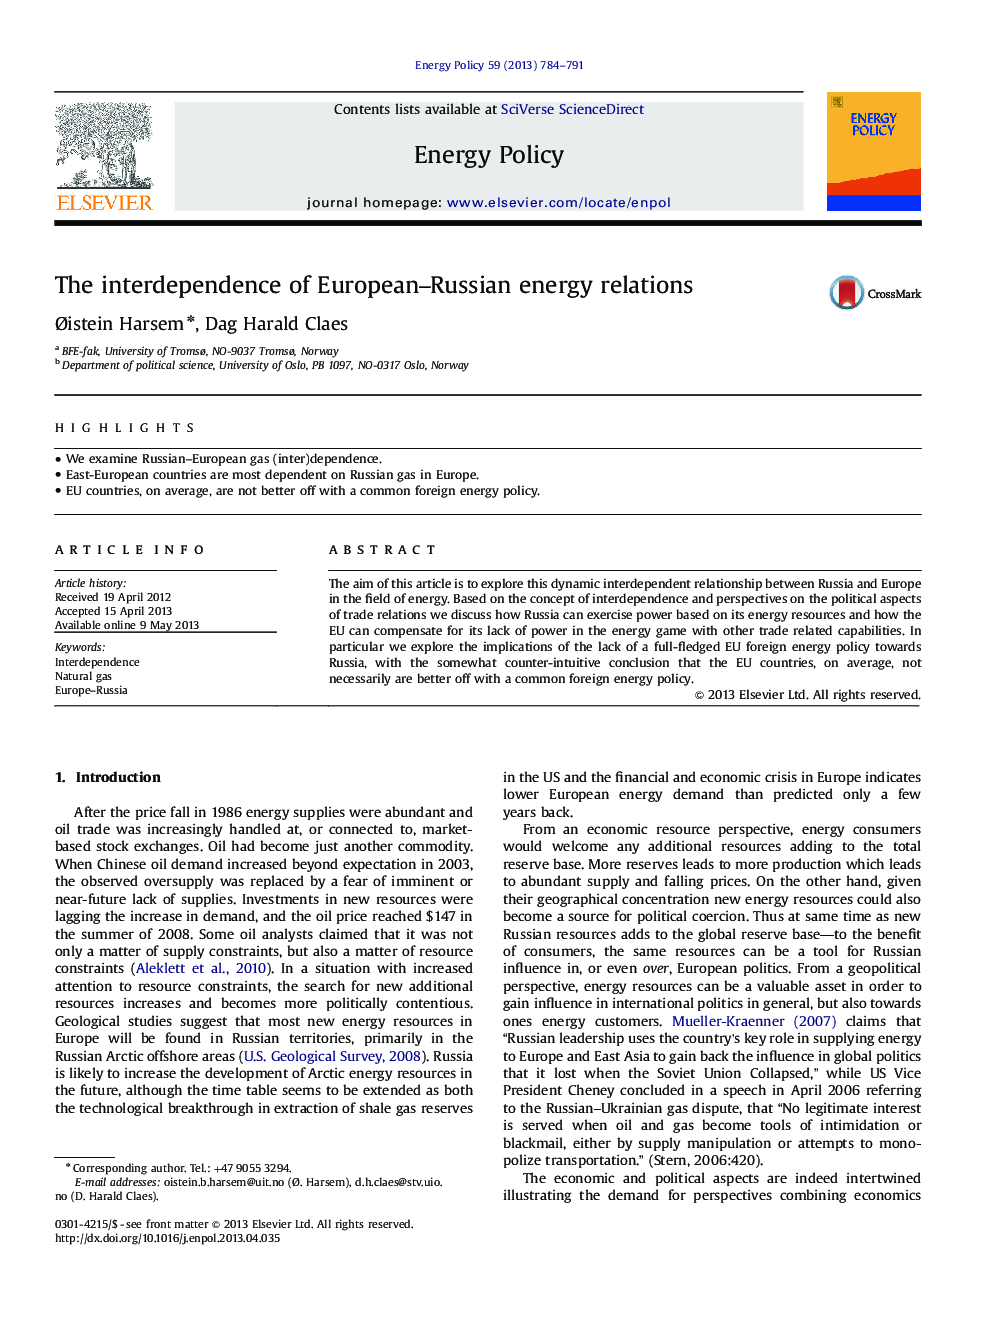 The interdependence of European-Russian energy relations